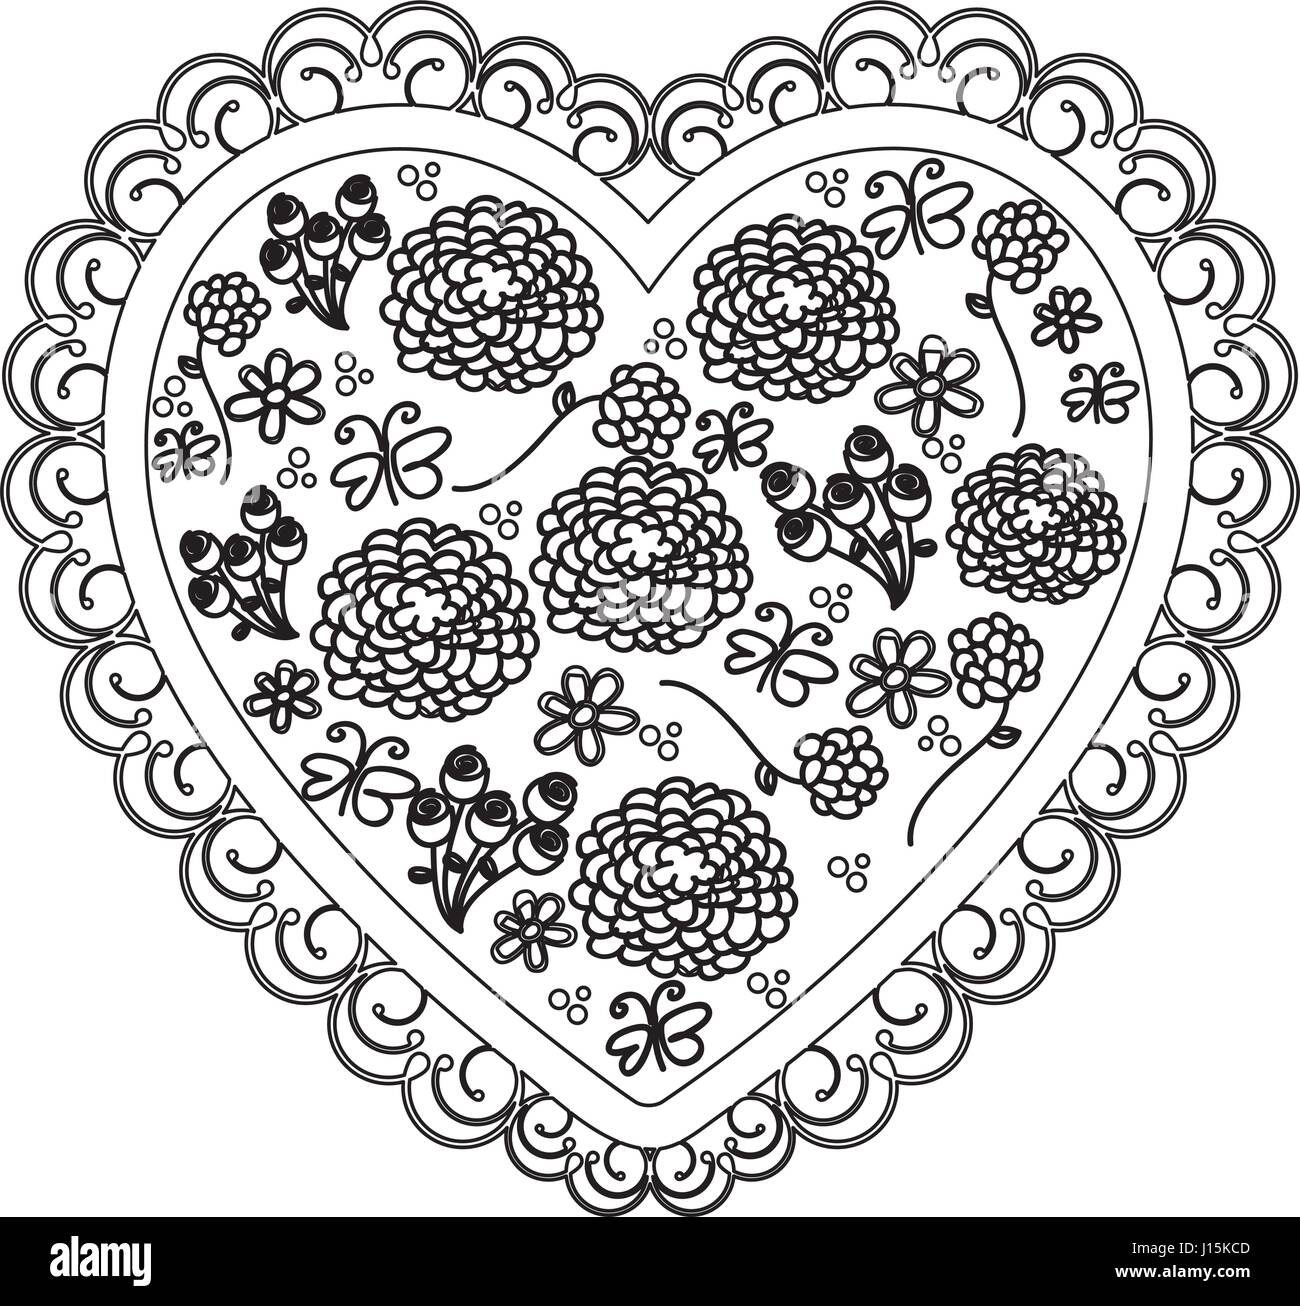 silhouette heart with decorative frame and pattern of flower and ...